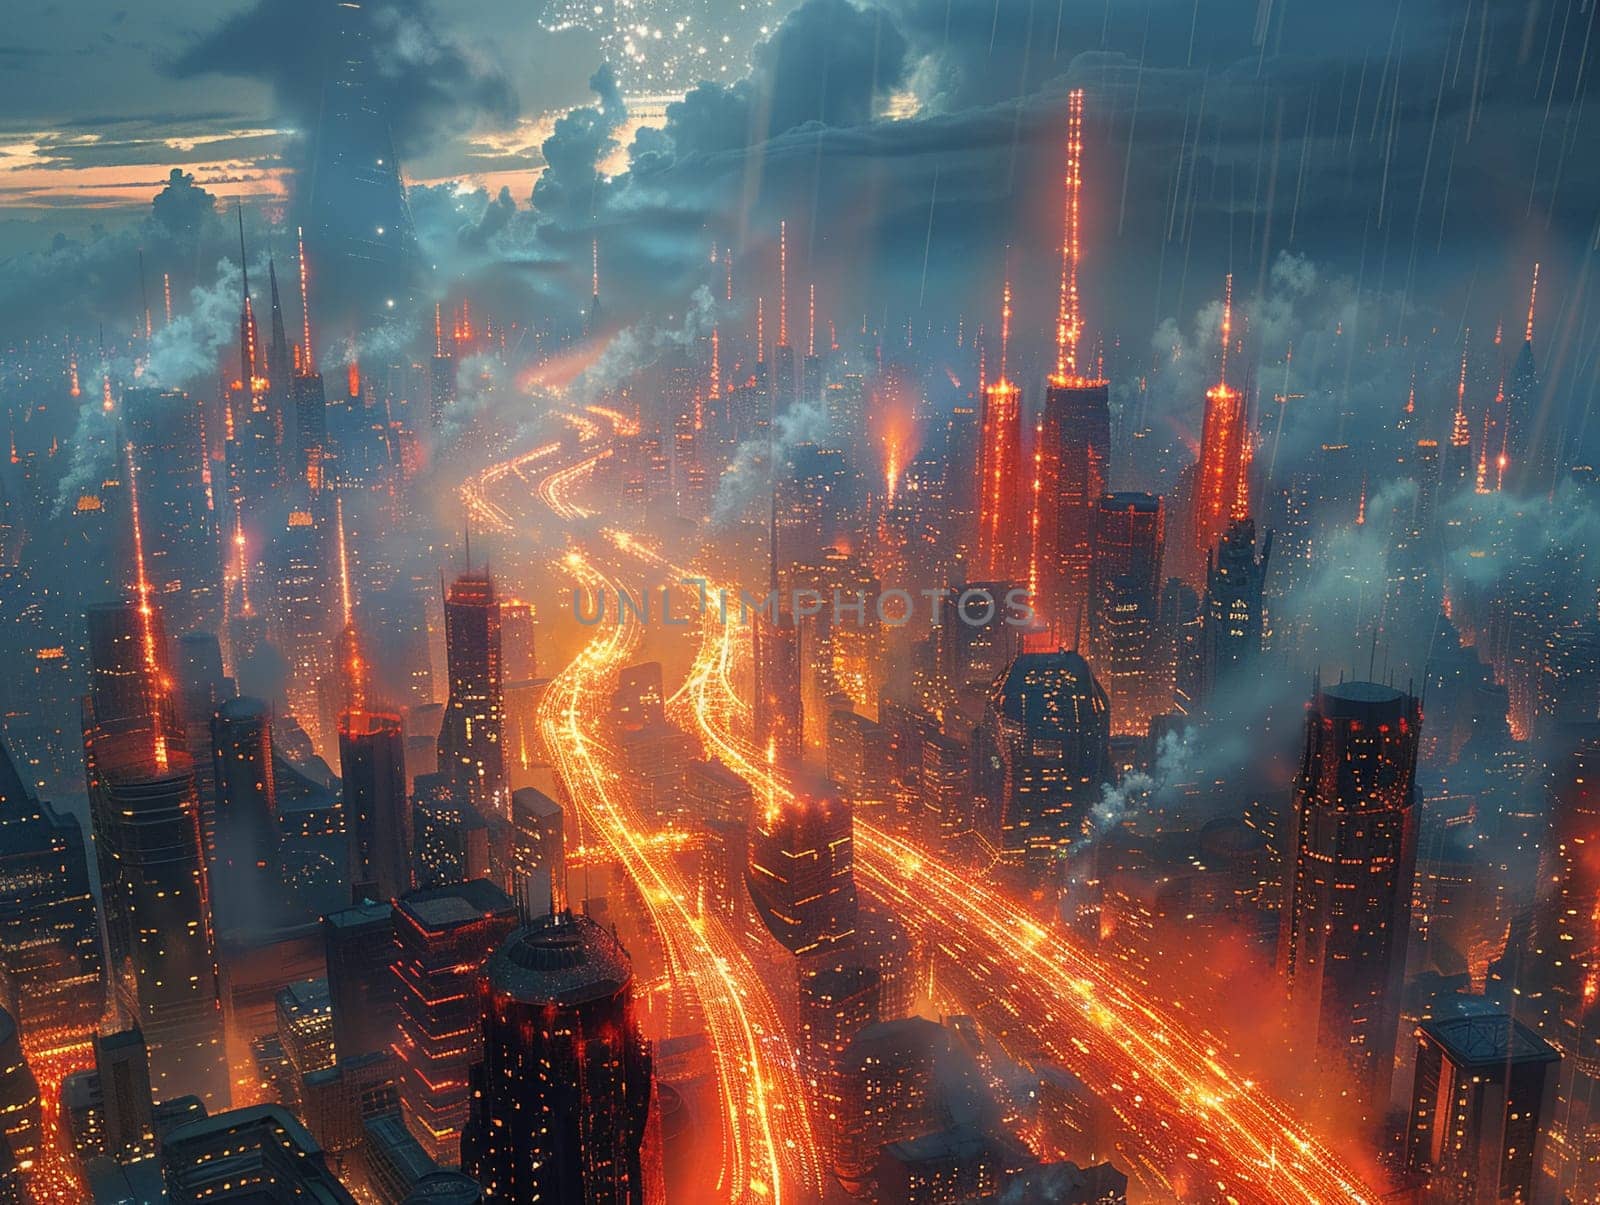 Electricity coursing through a futuristic city, illustration showing vibrant energy flows and technological advancements.